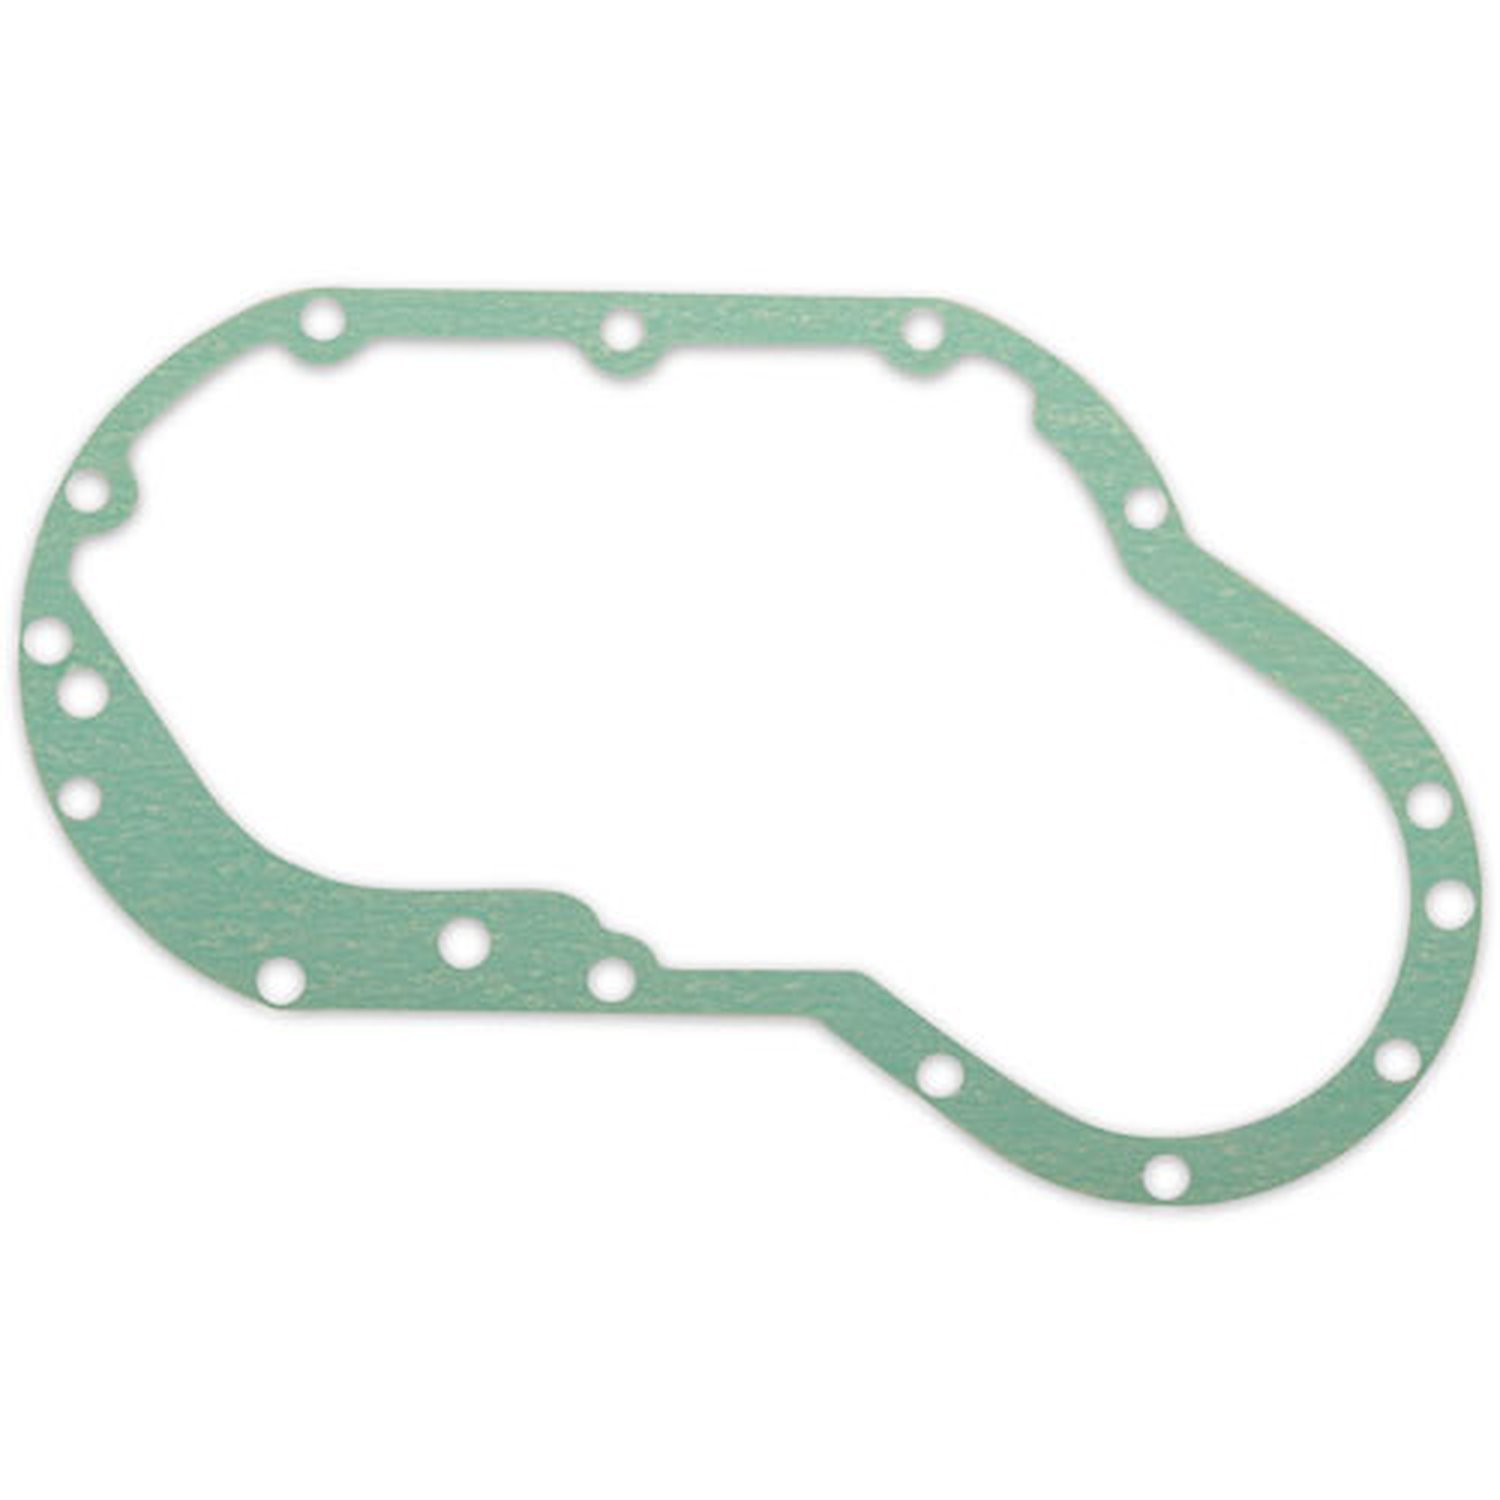 Supercharger Gasket Gear Cover